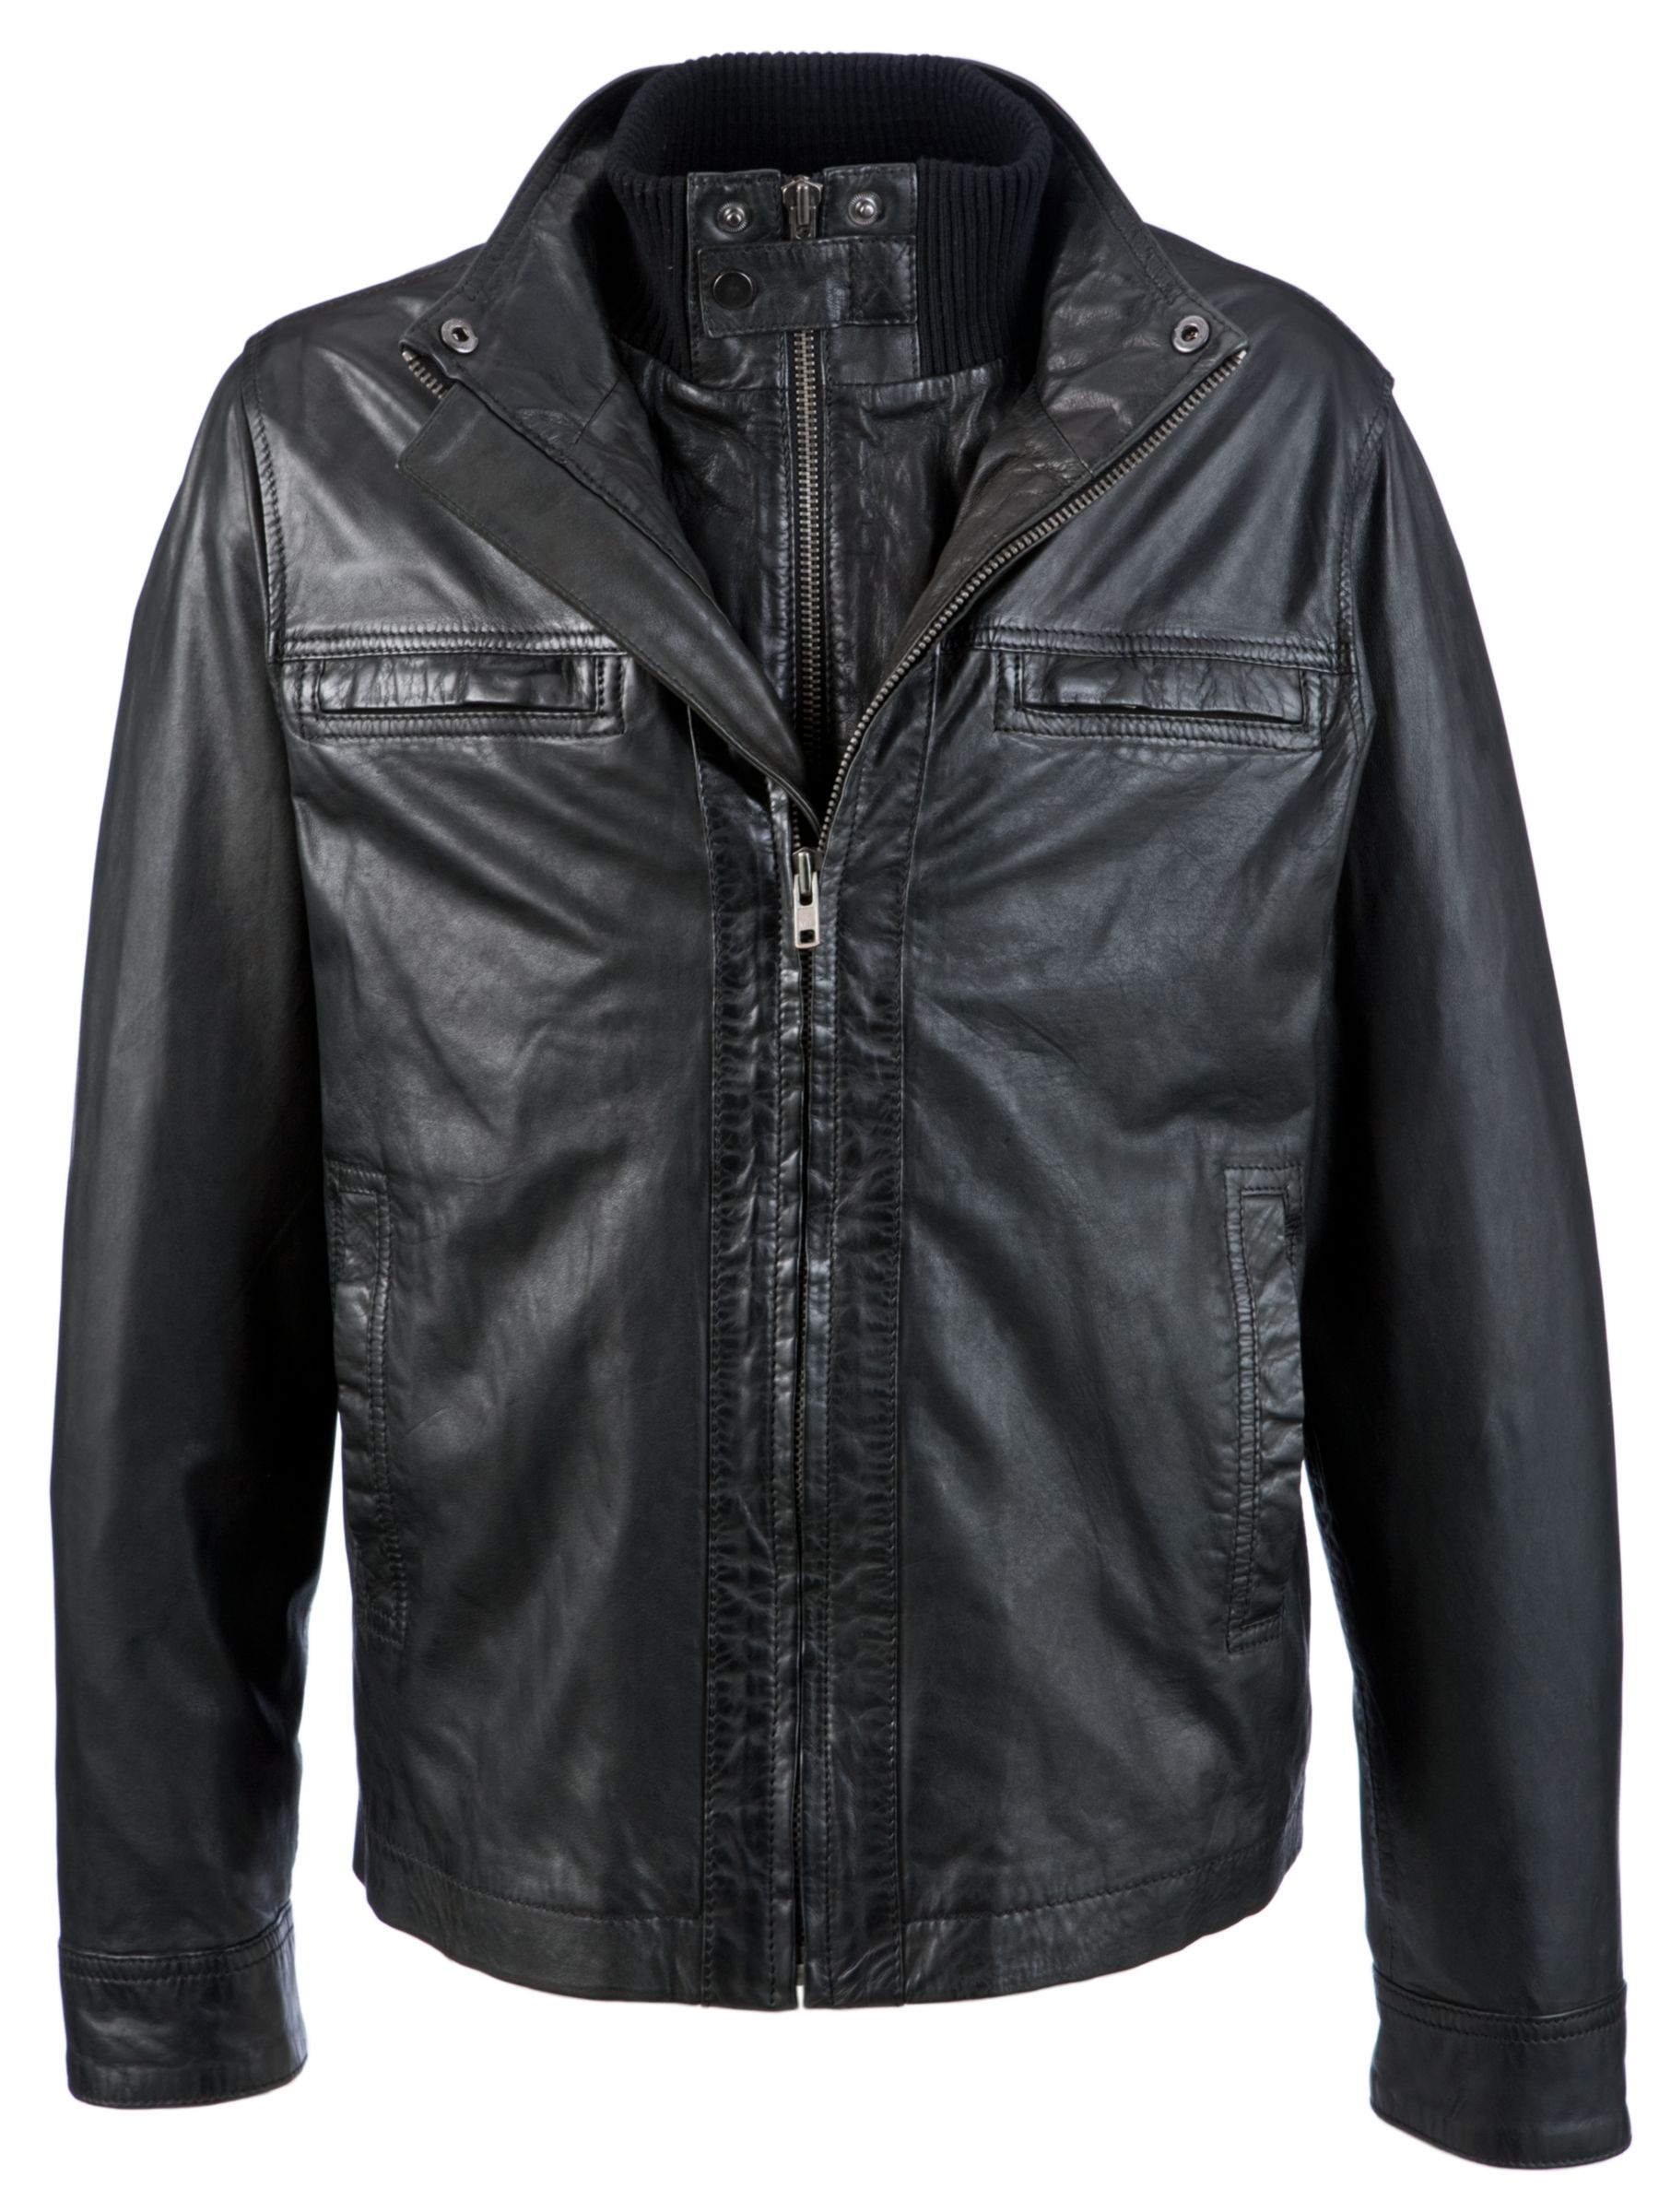 COLLECTION, John Lewis Men Double Collar 2 in 1 Leather Jacket, Black at JohnLewis